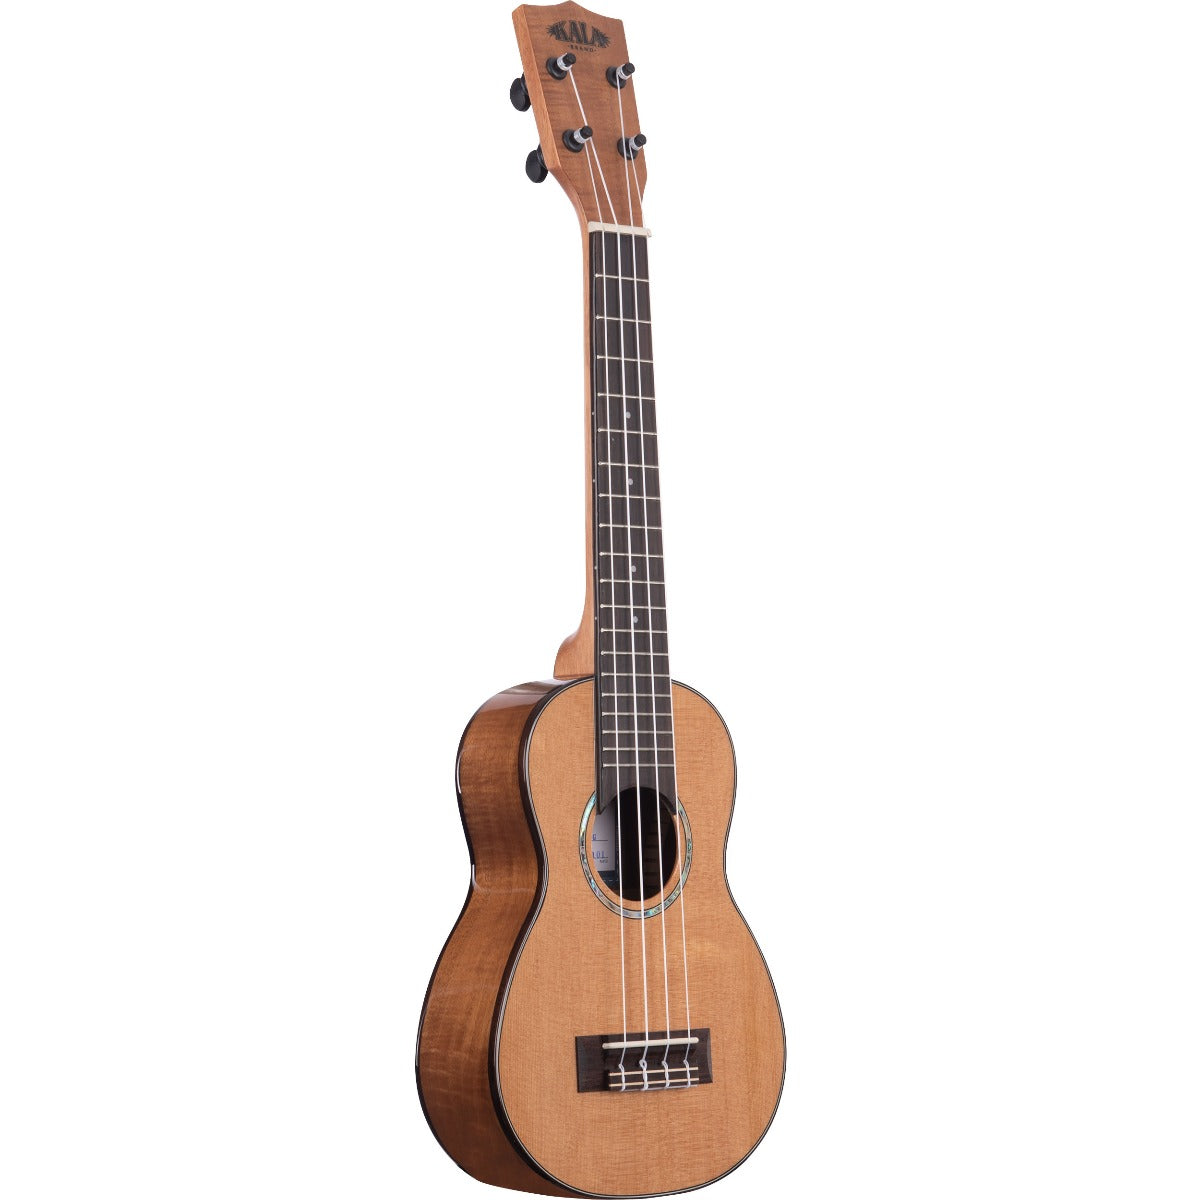 Perspective view of Kala KA-SCAC-C Solid Cedar Top Acacia Concert Ukulele showing top and left side